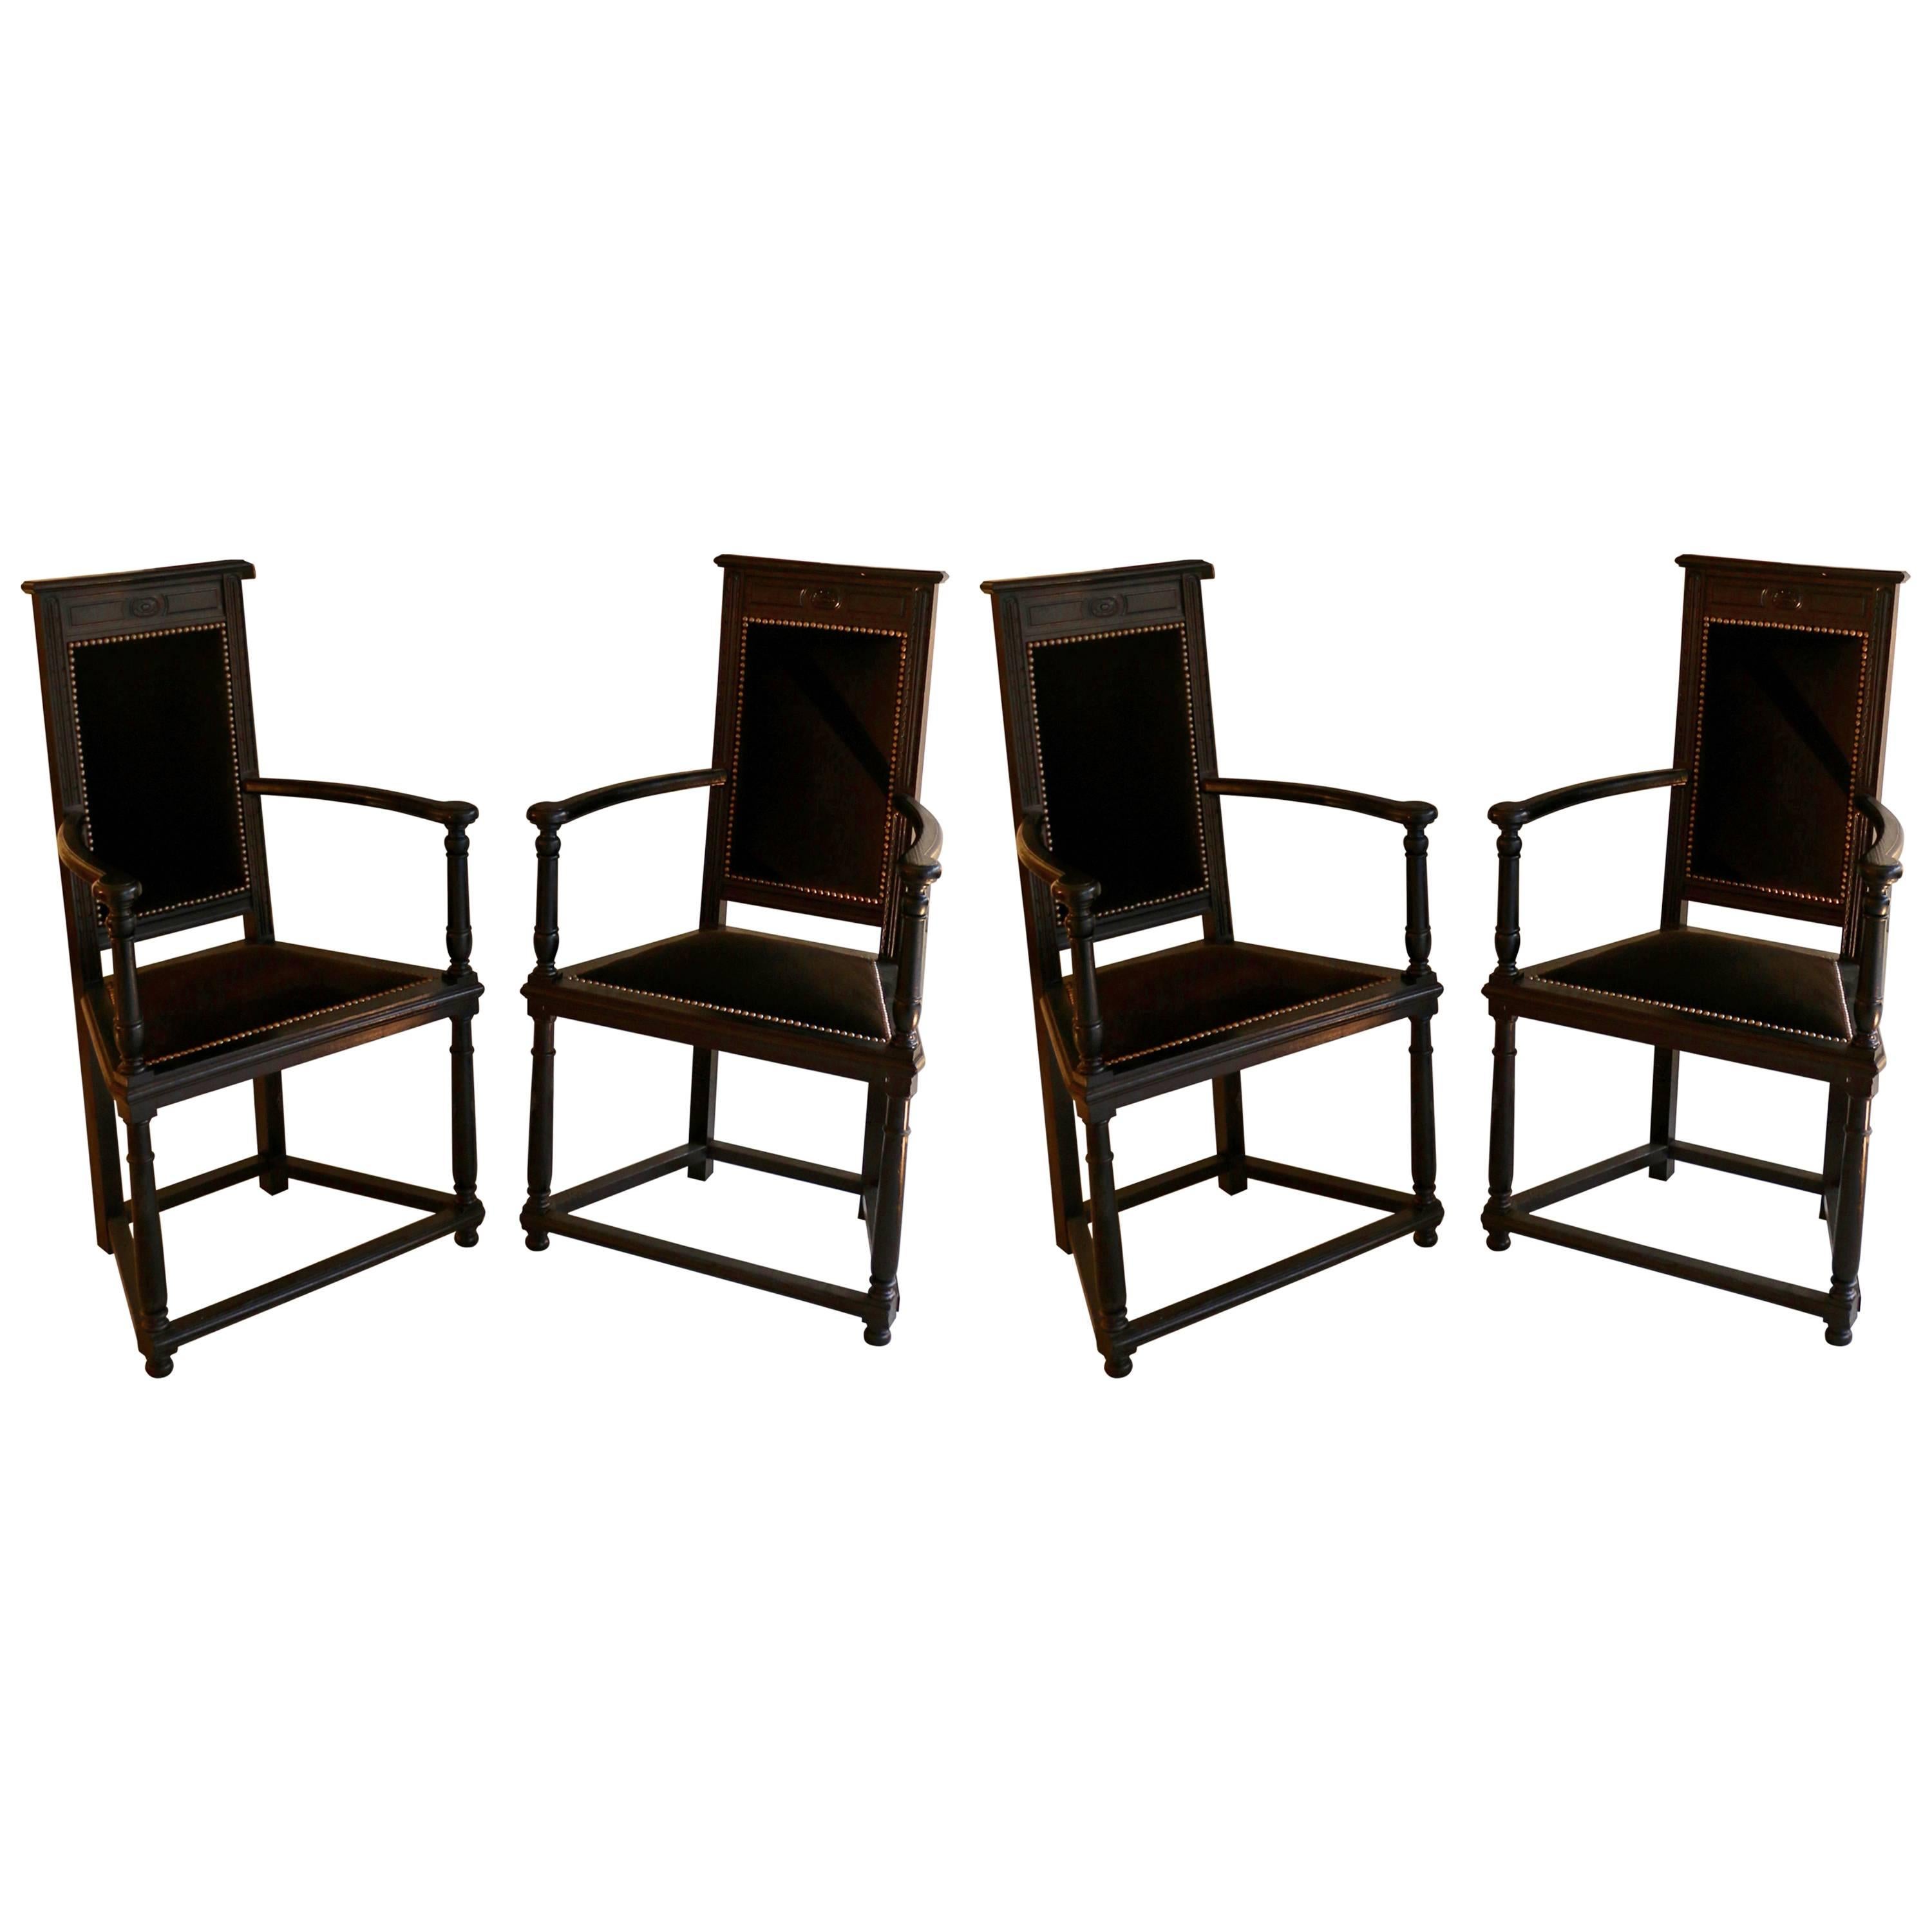 Late 19th Century Pair of Black Wooden Armchairs  For Sale